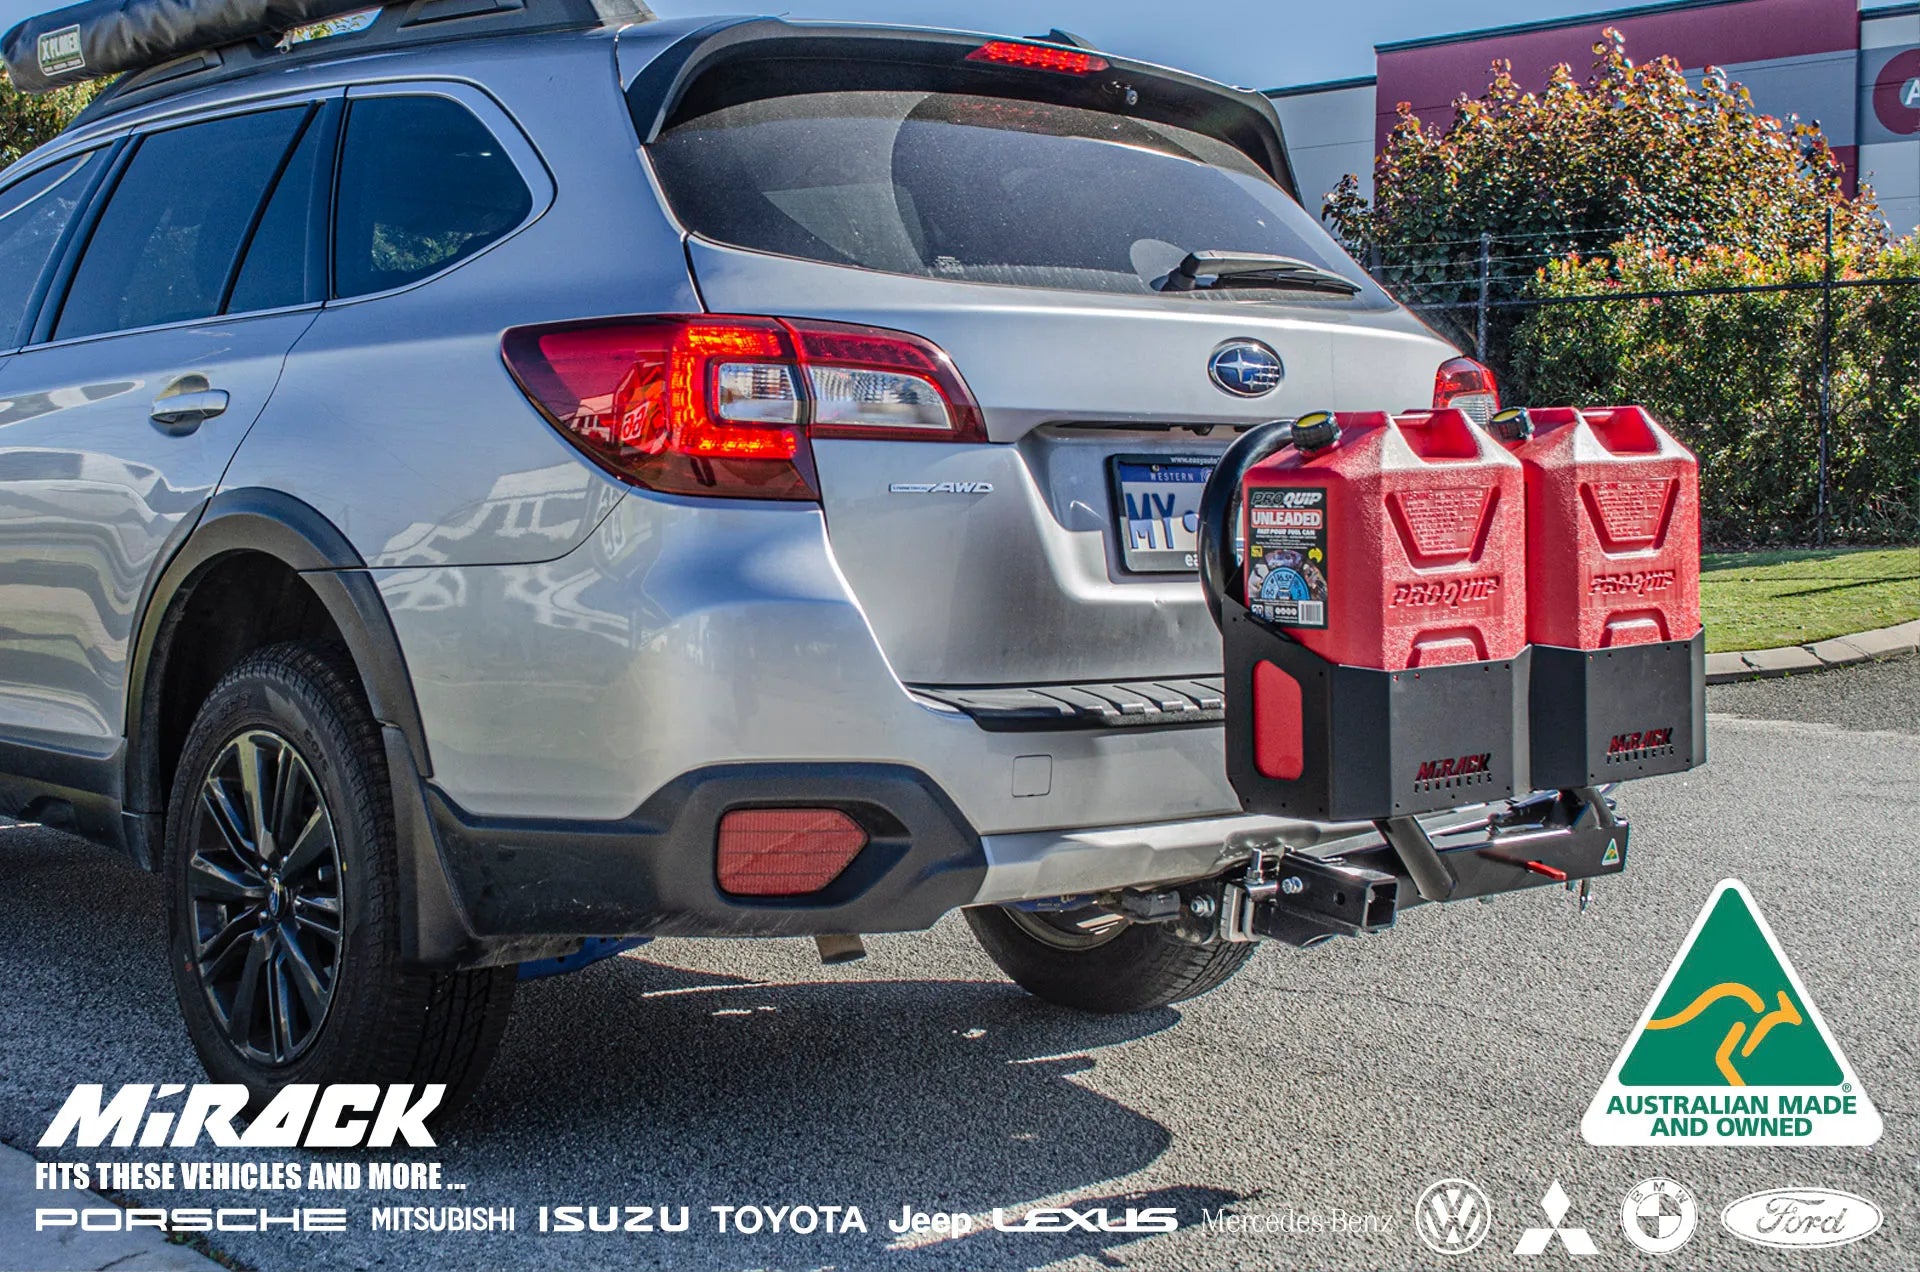 Fuel your journey, simplify access: Mirack's dual jerry can holders on your Subaru AWD offer convenient refueling alongside the swinging spare wheel carrier.